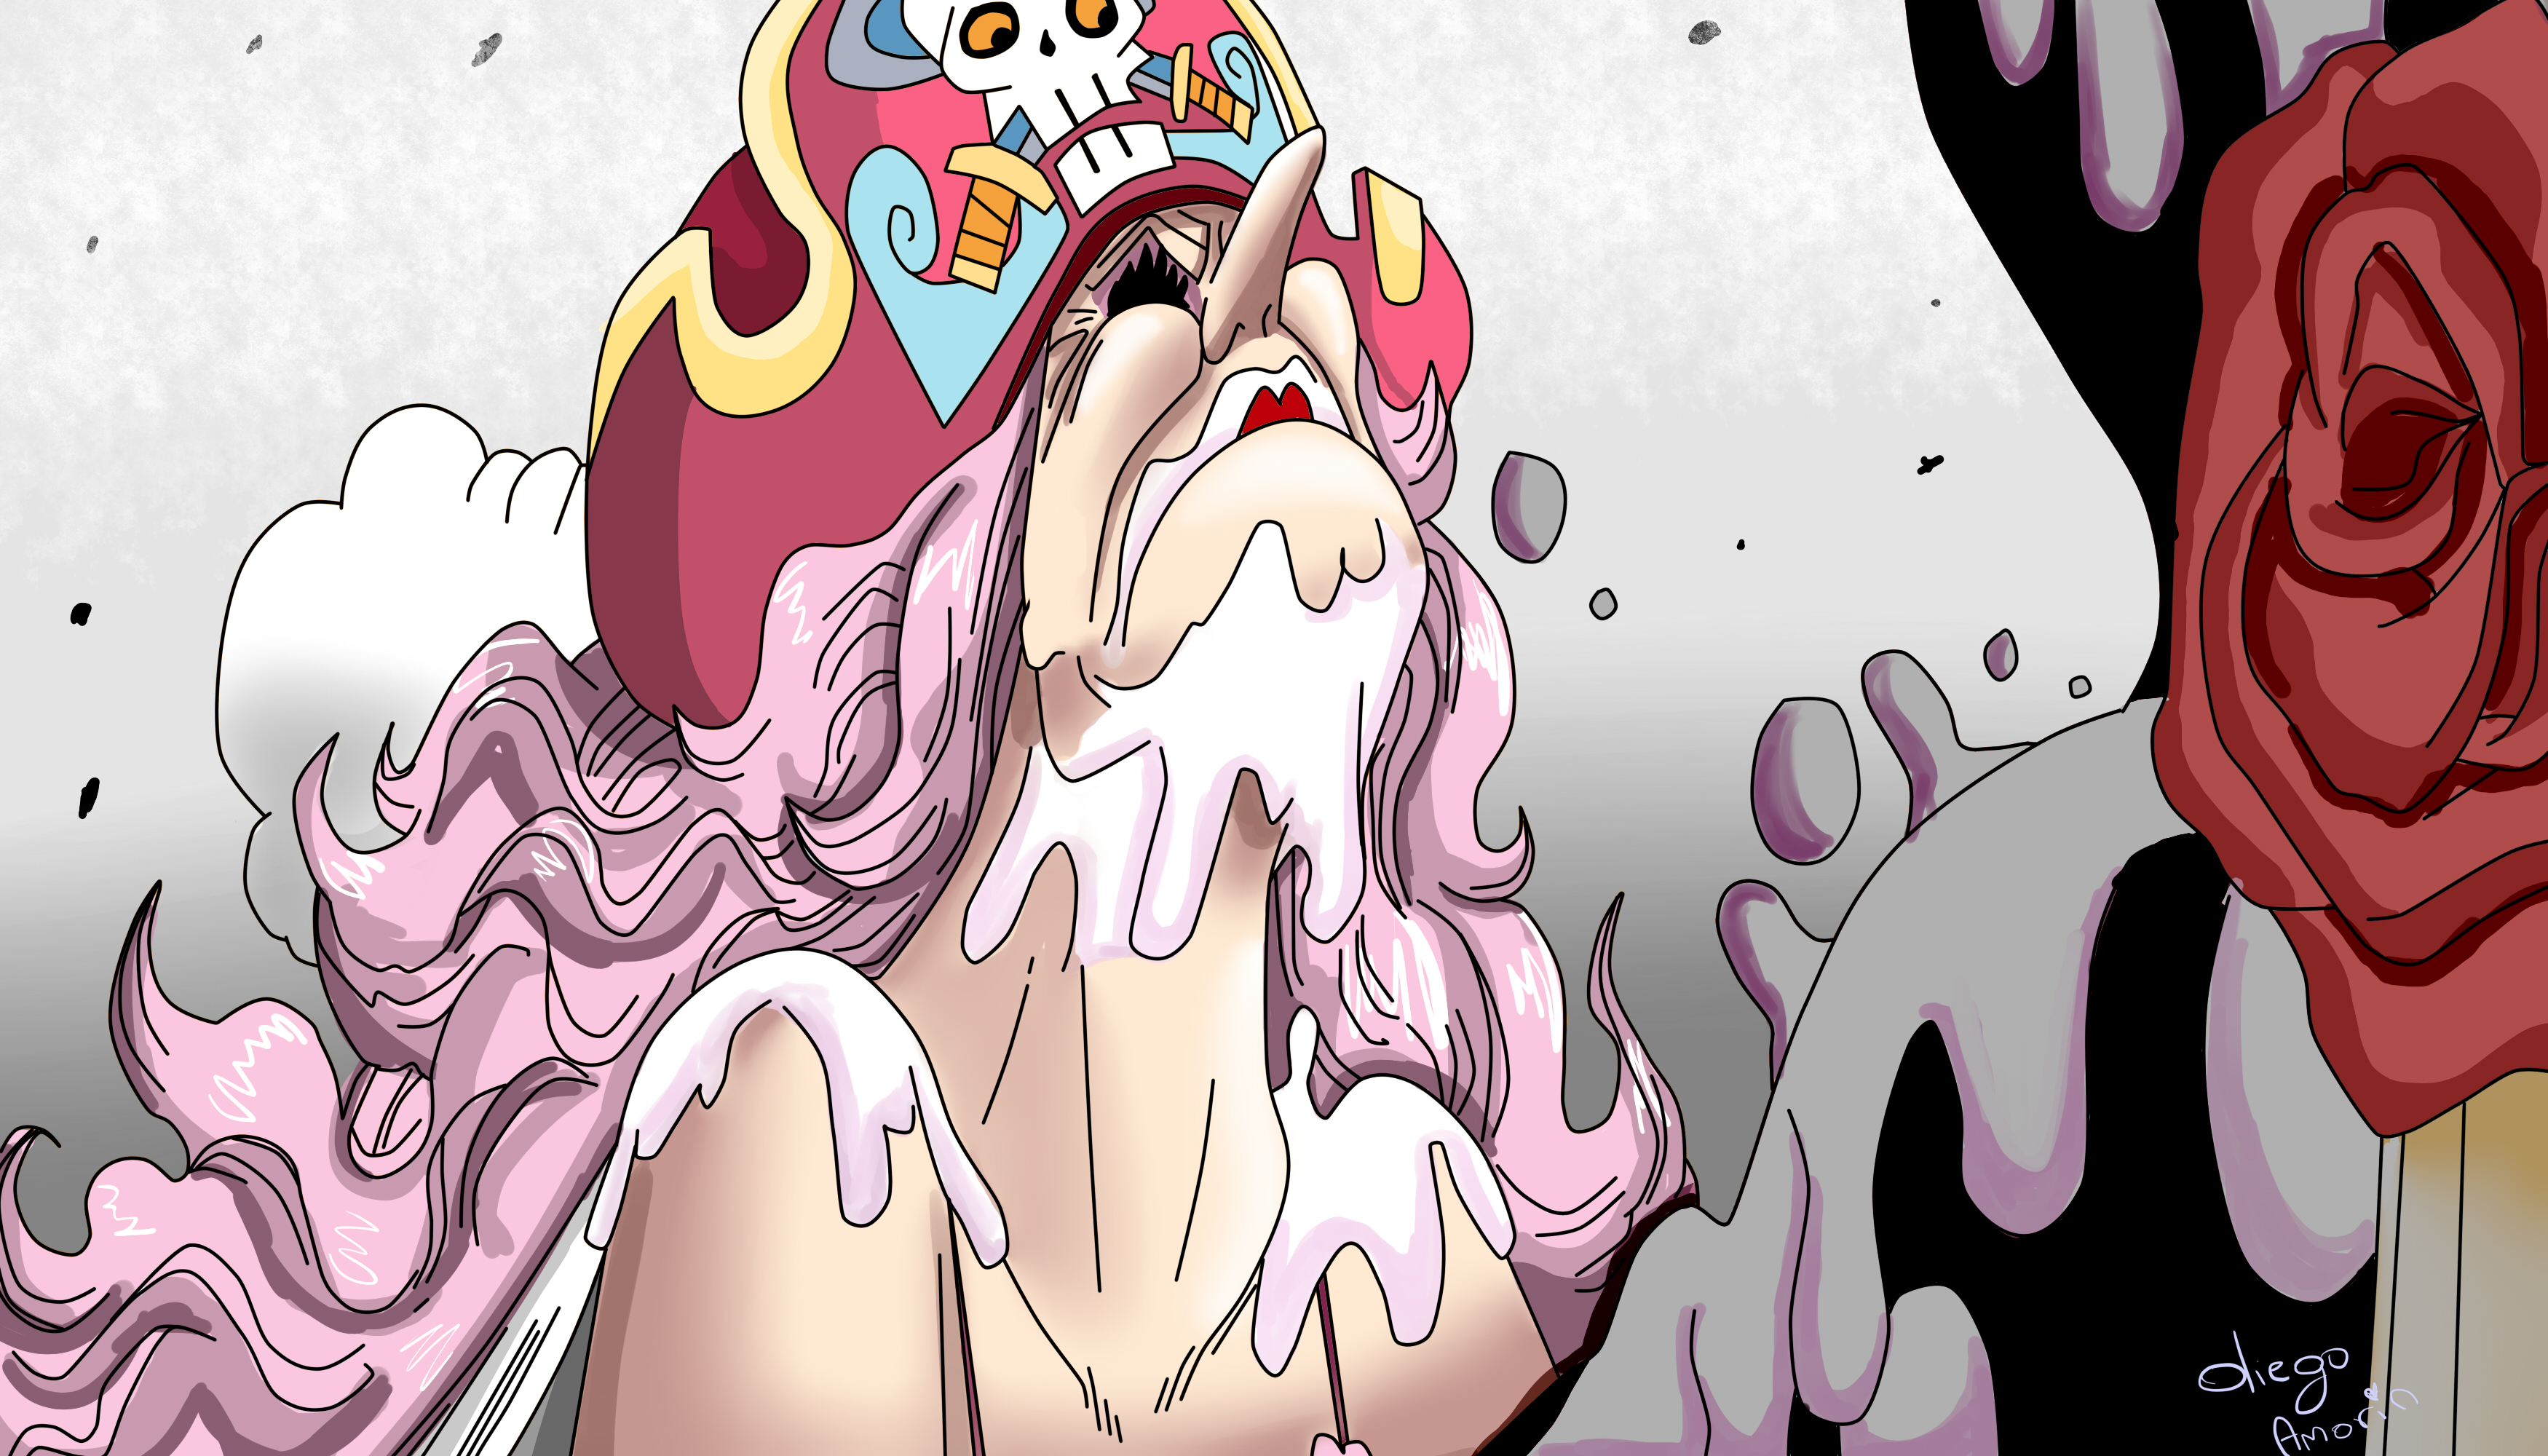 Big Mom S Reaction To The Cake Her Moment Of Madness One Piece.